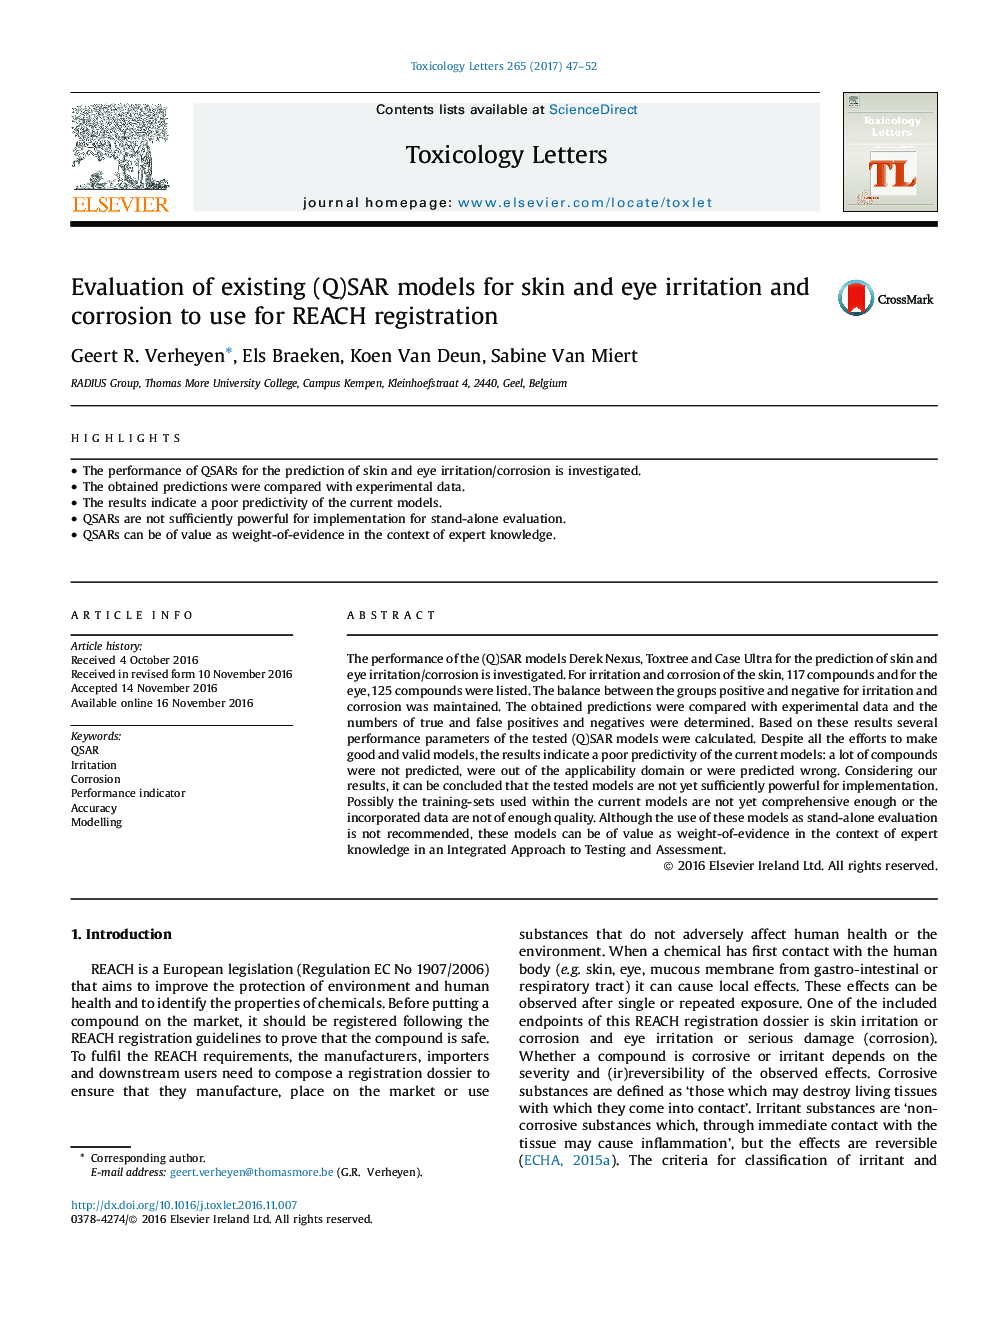 Evaluation of existing (Q)SAR models for skin and eye irritation and corrosion to use for REACH registration